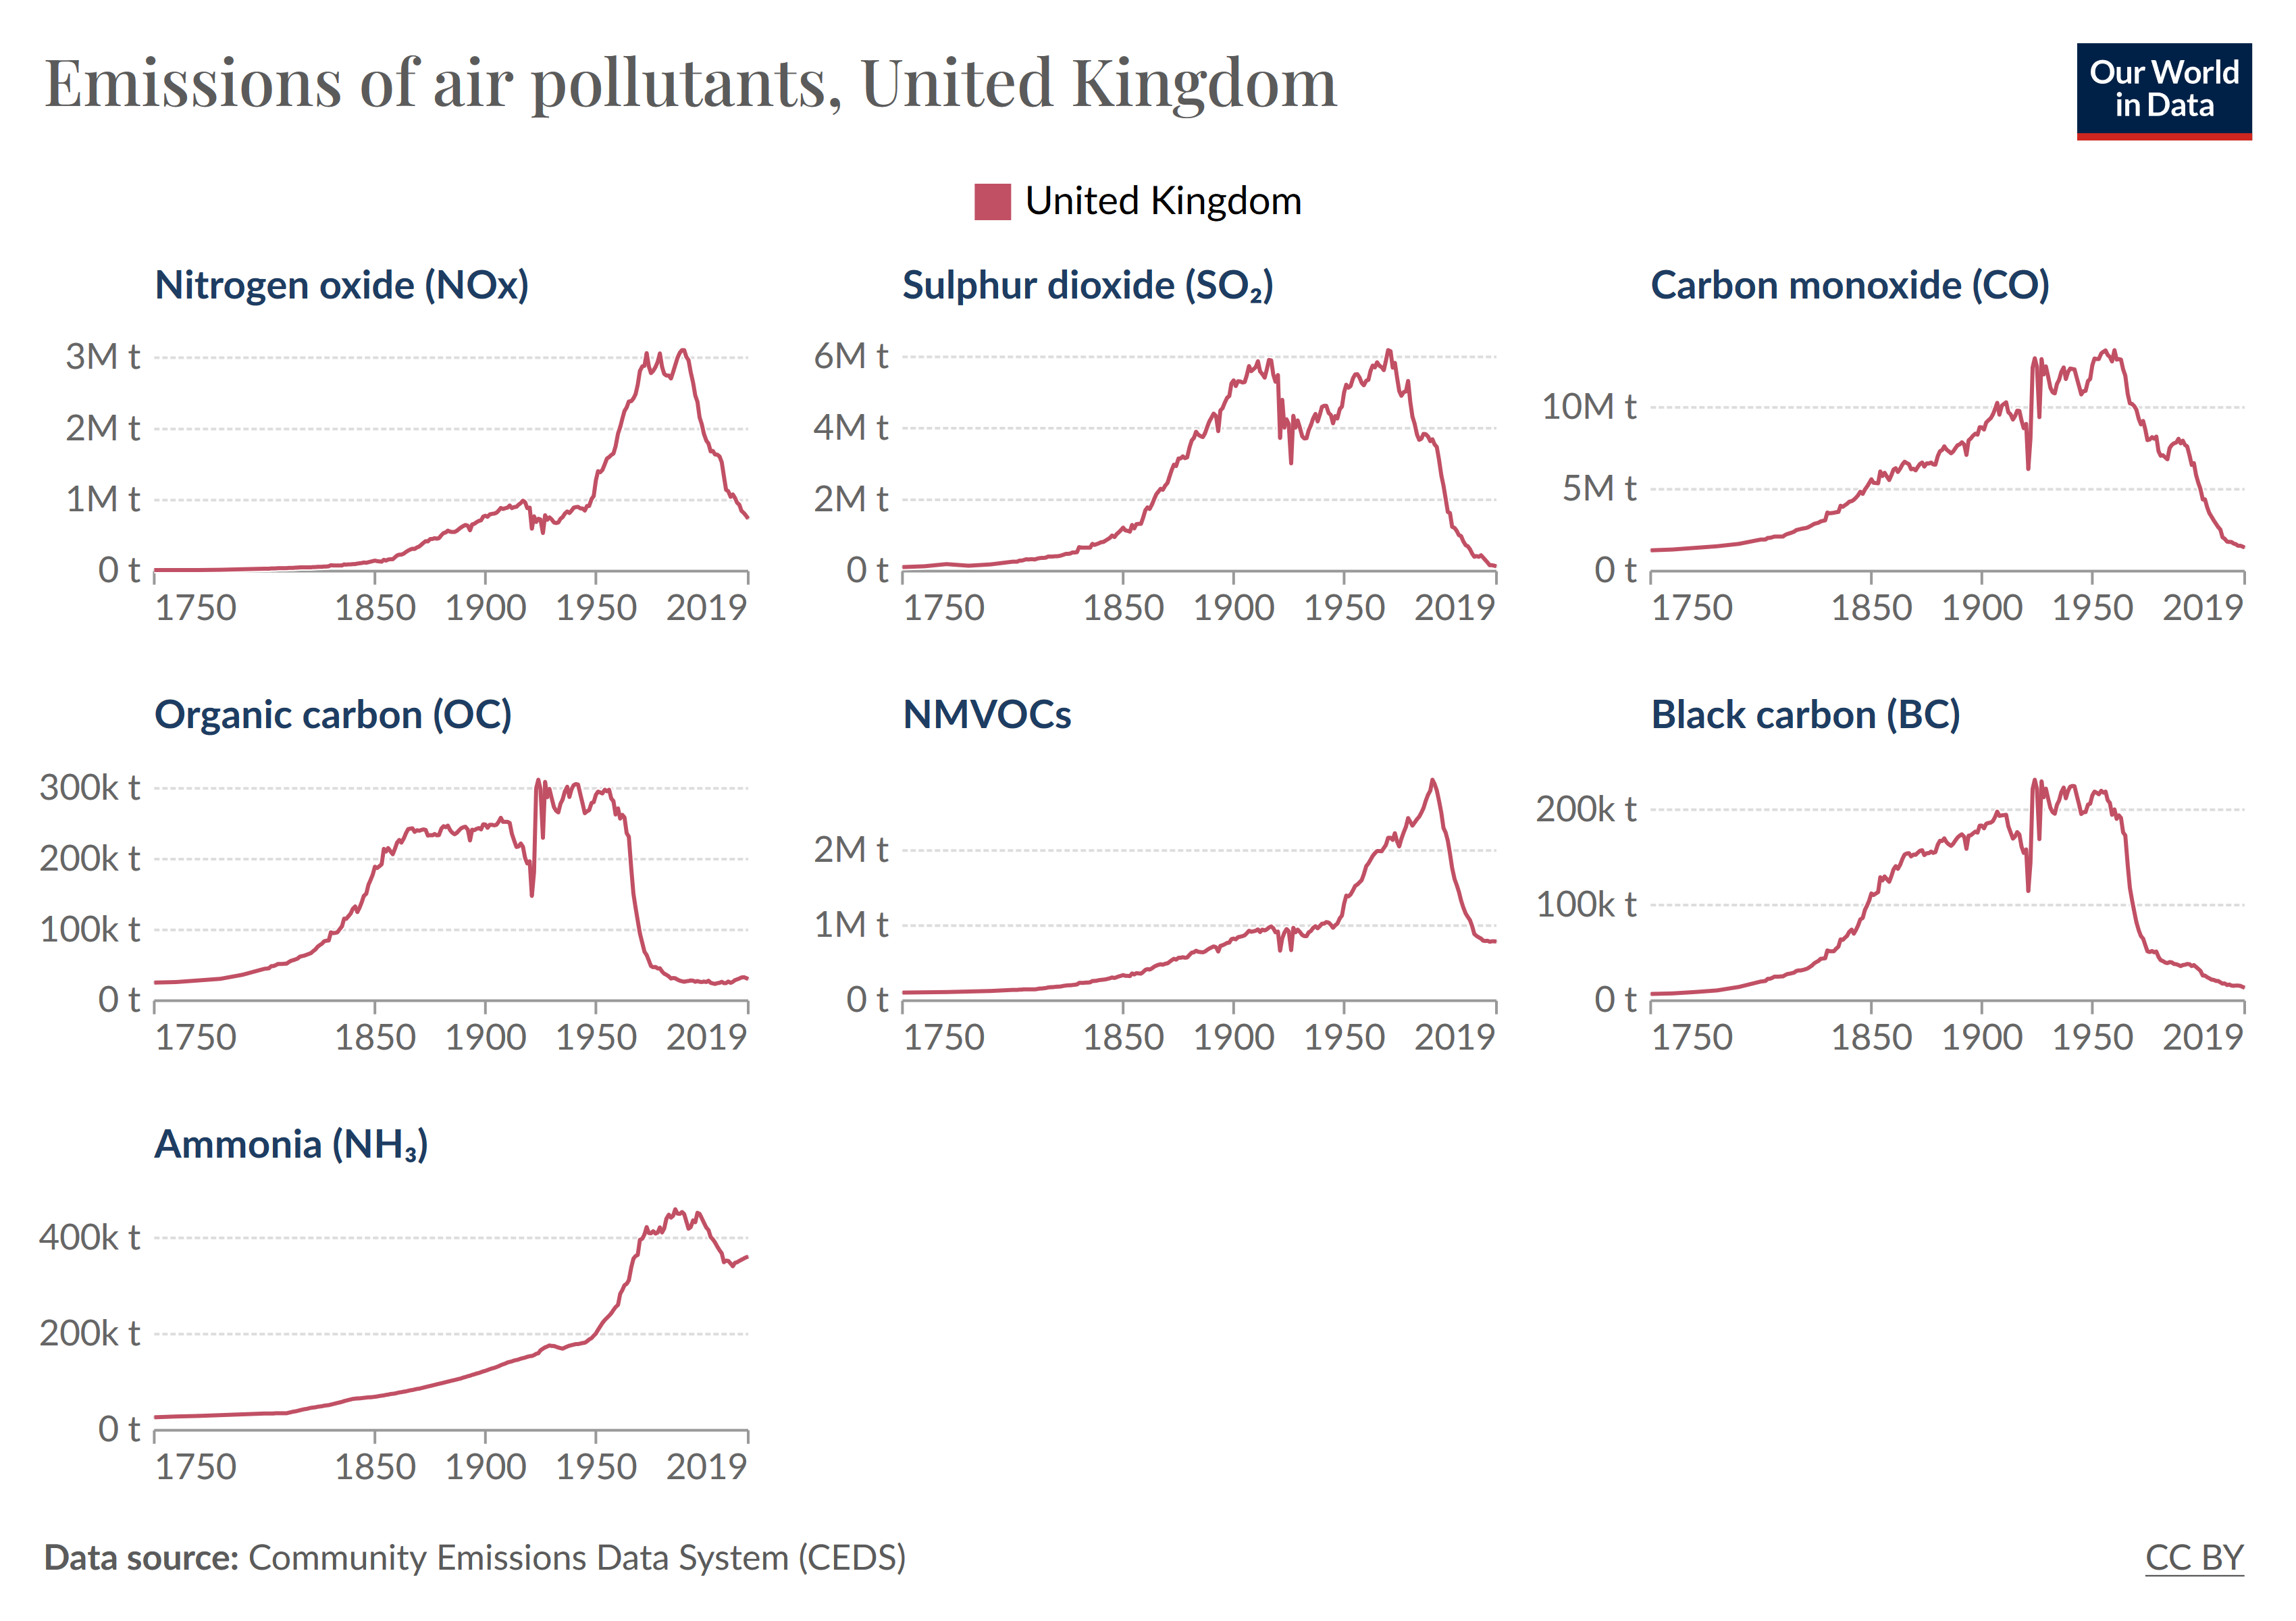 A chart showing the emissions of several pollutants over time in China.